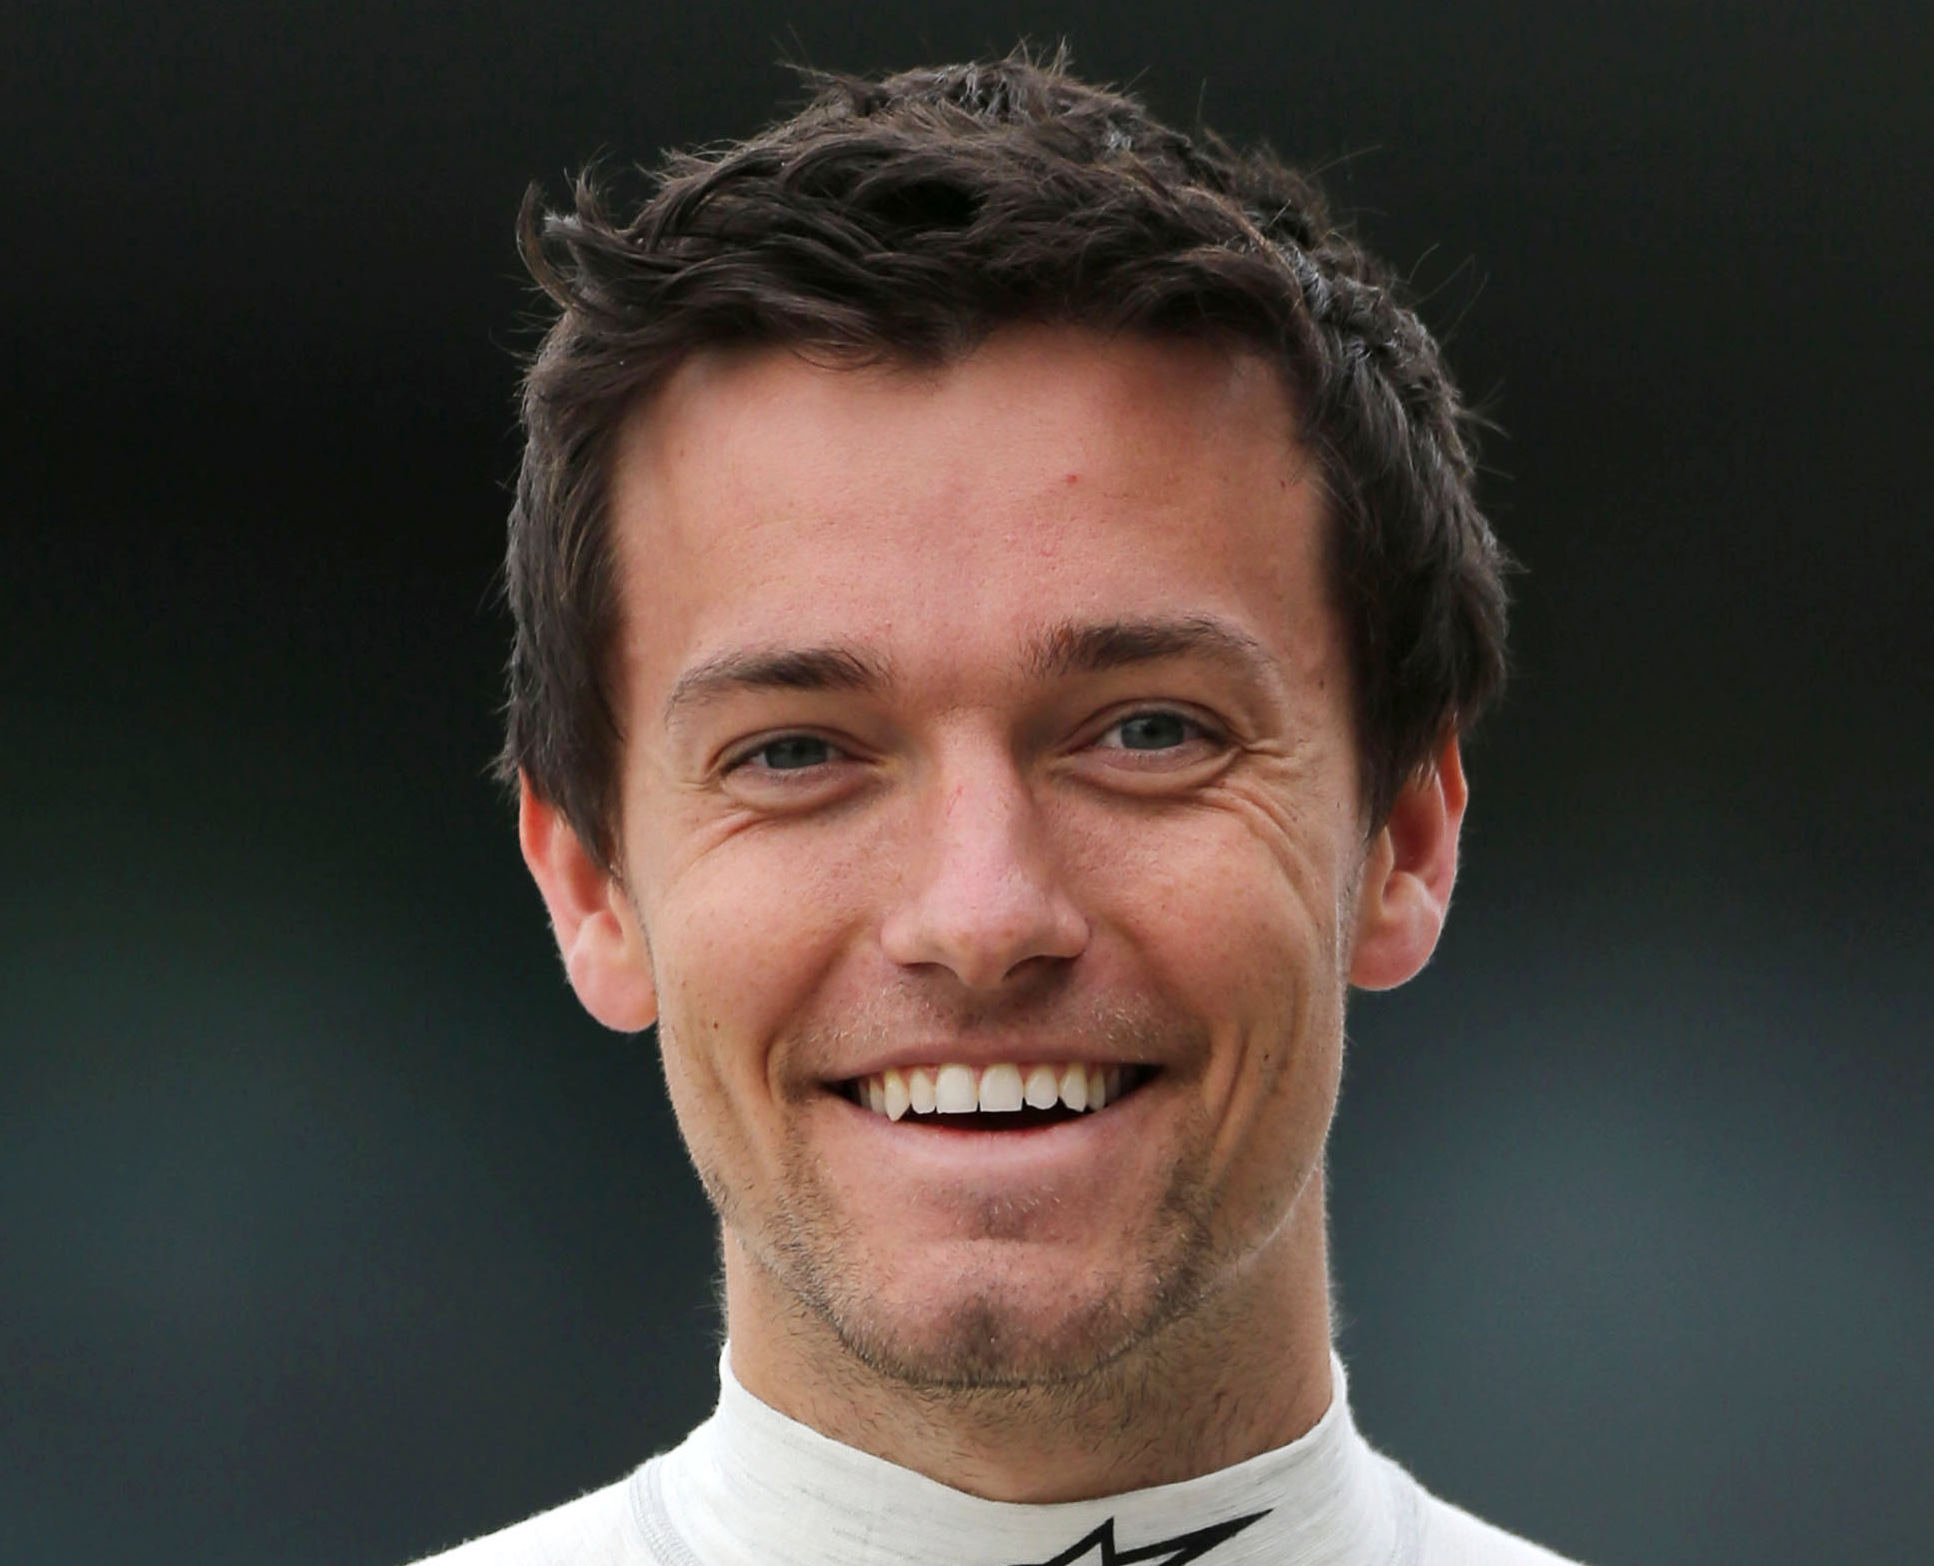 Palmer may not be able to keep that Lotus seat he bought